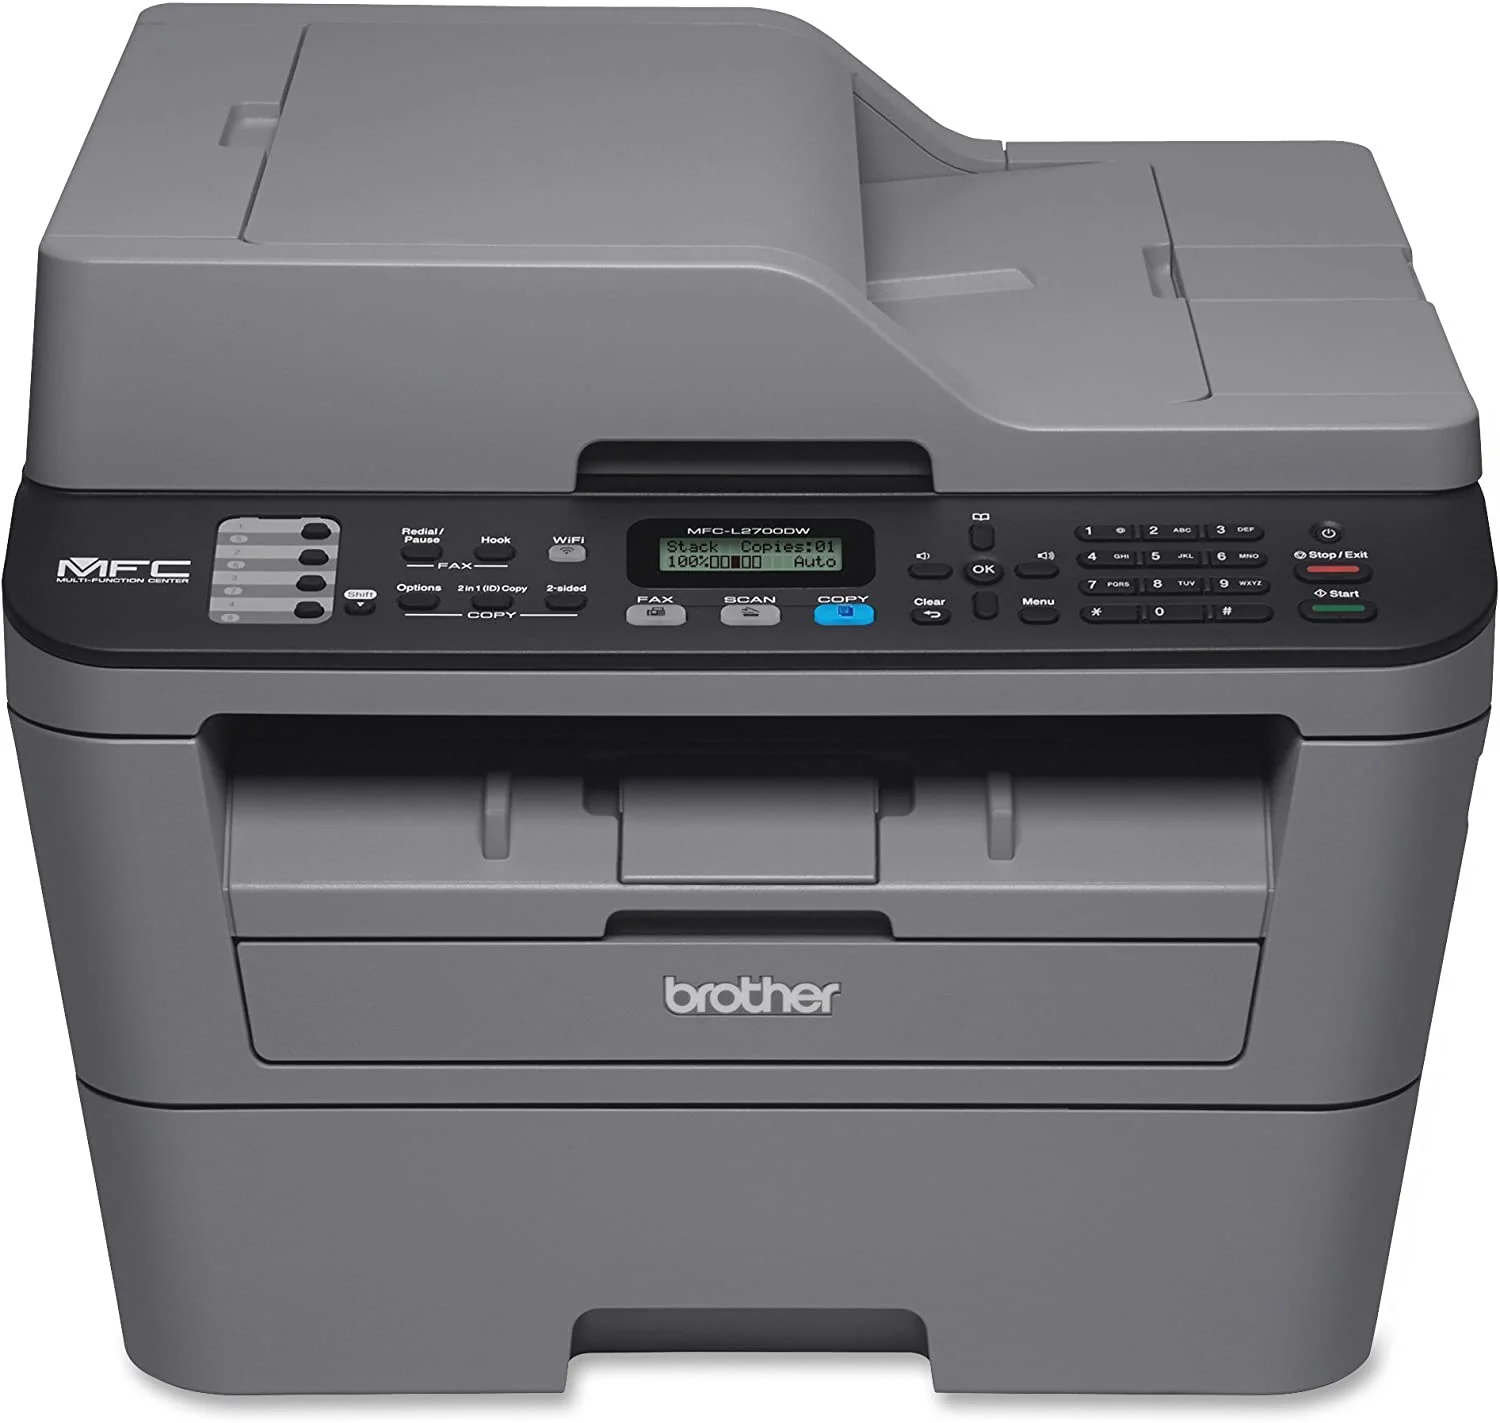 best home printer for occasional use